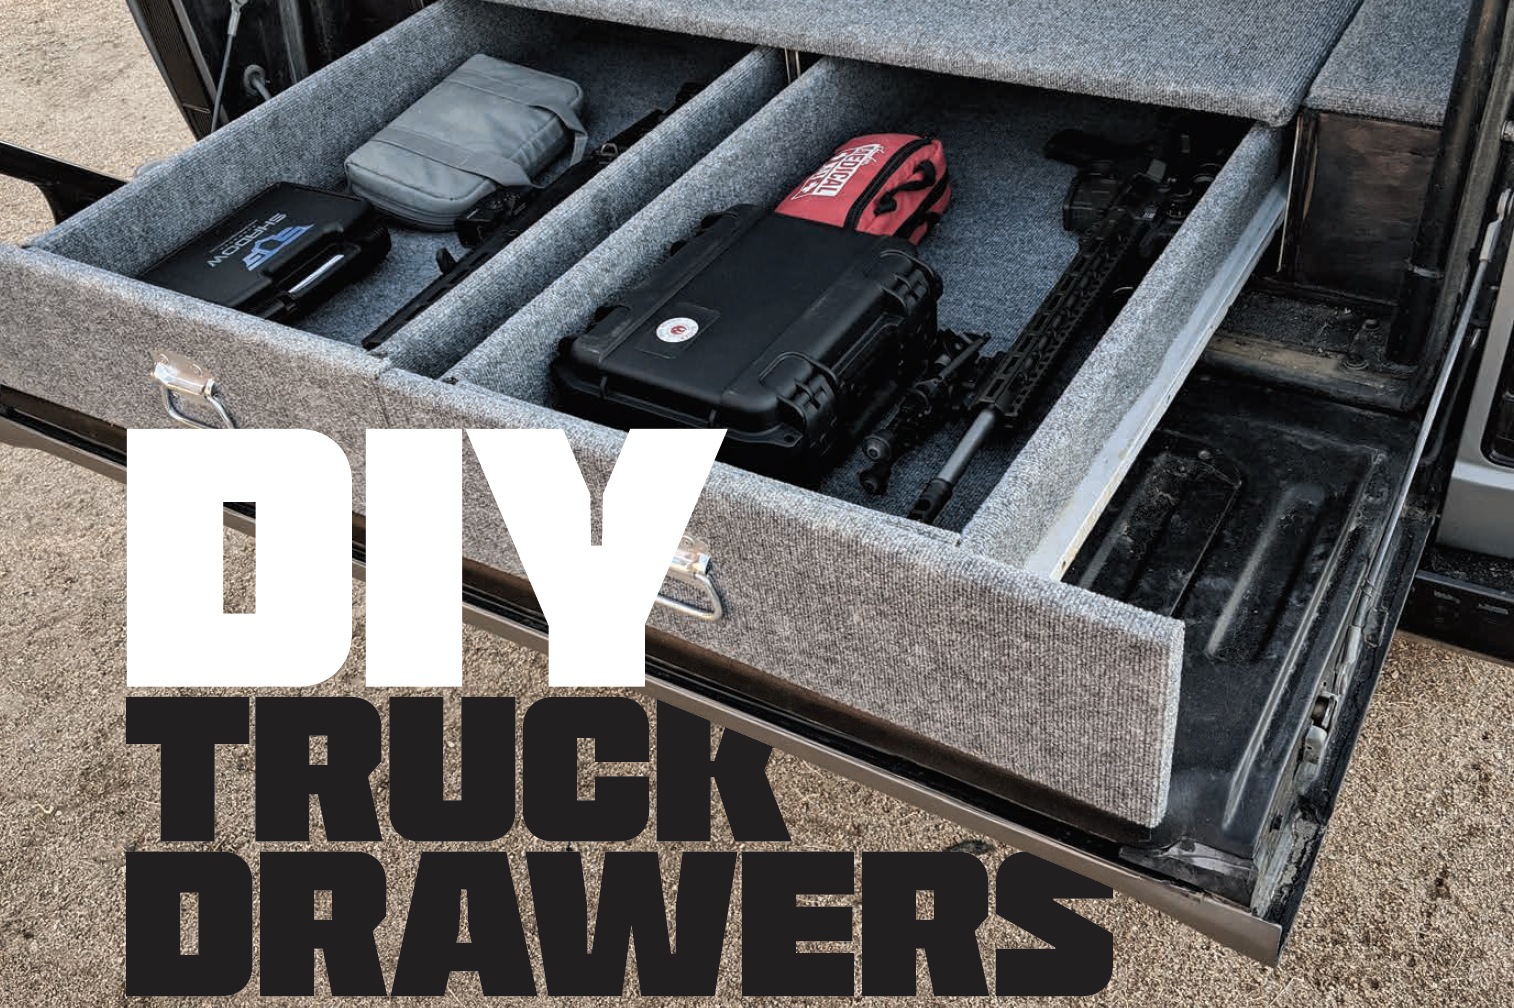 DIY Truck Drawers for Guns and Gear | RECOIL